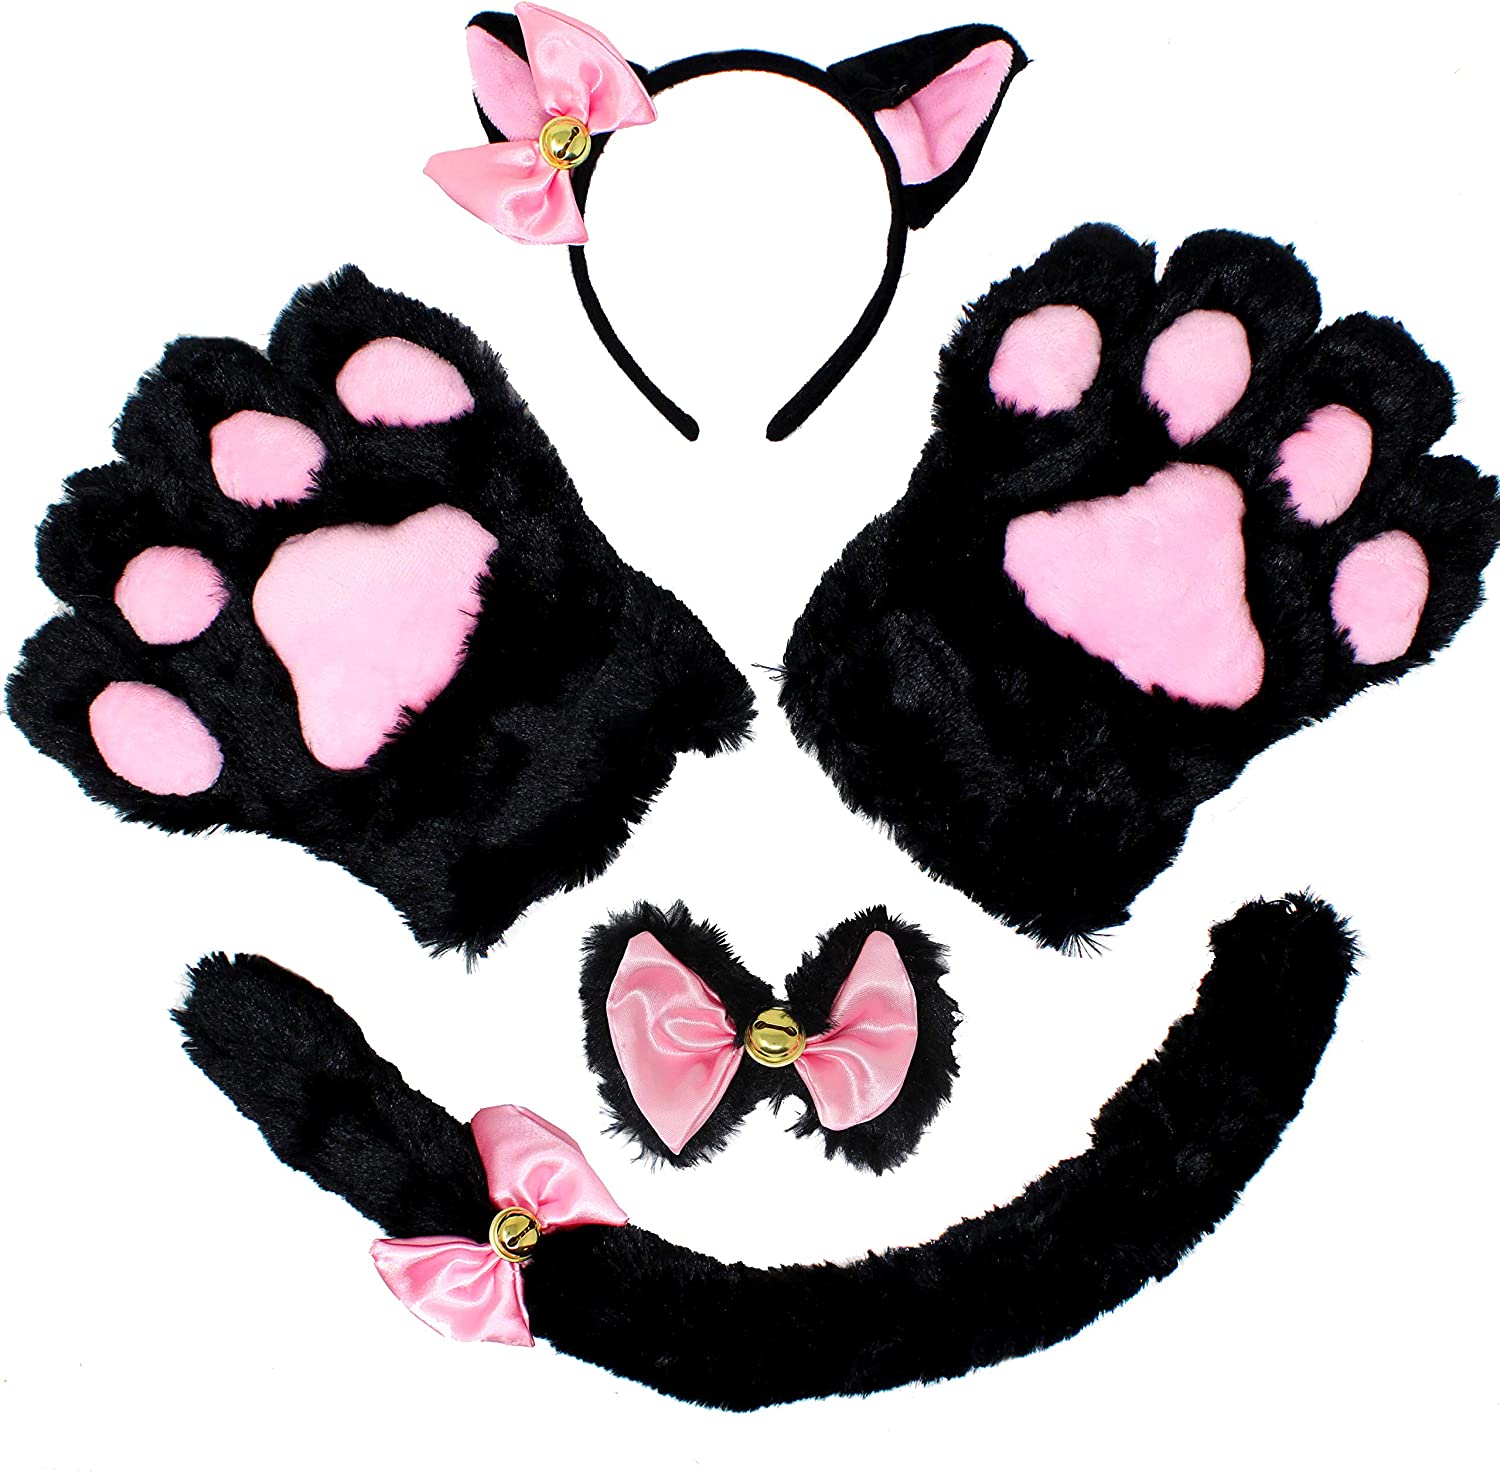 Spooktacular Creations One Size Fits All Easy Wear Black Cat Costume